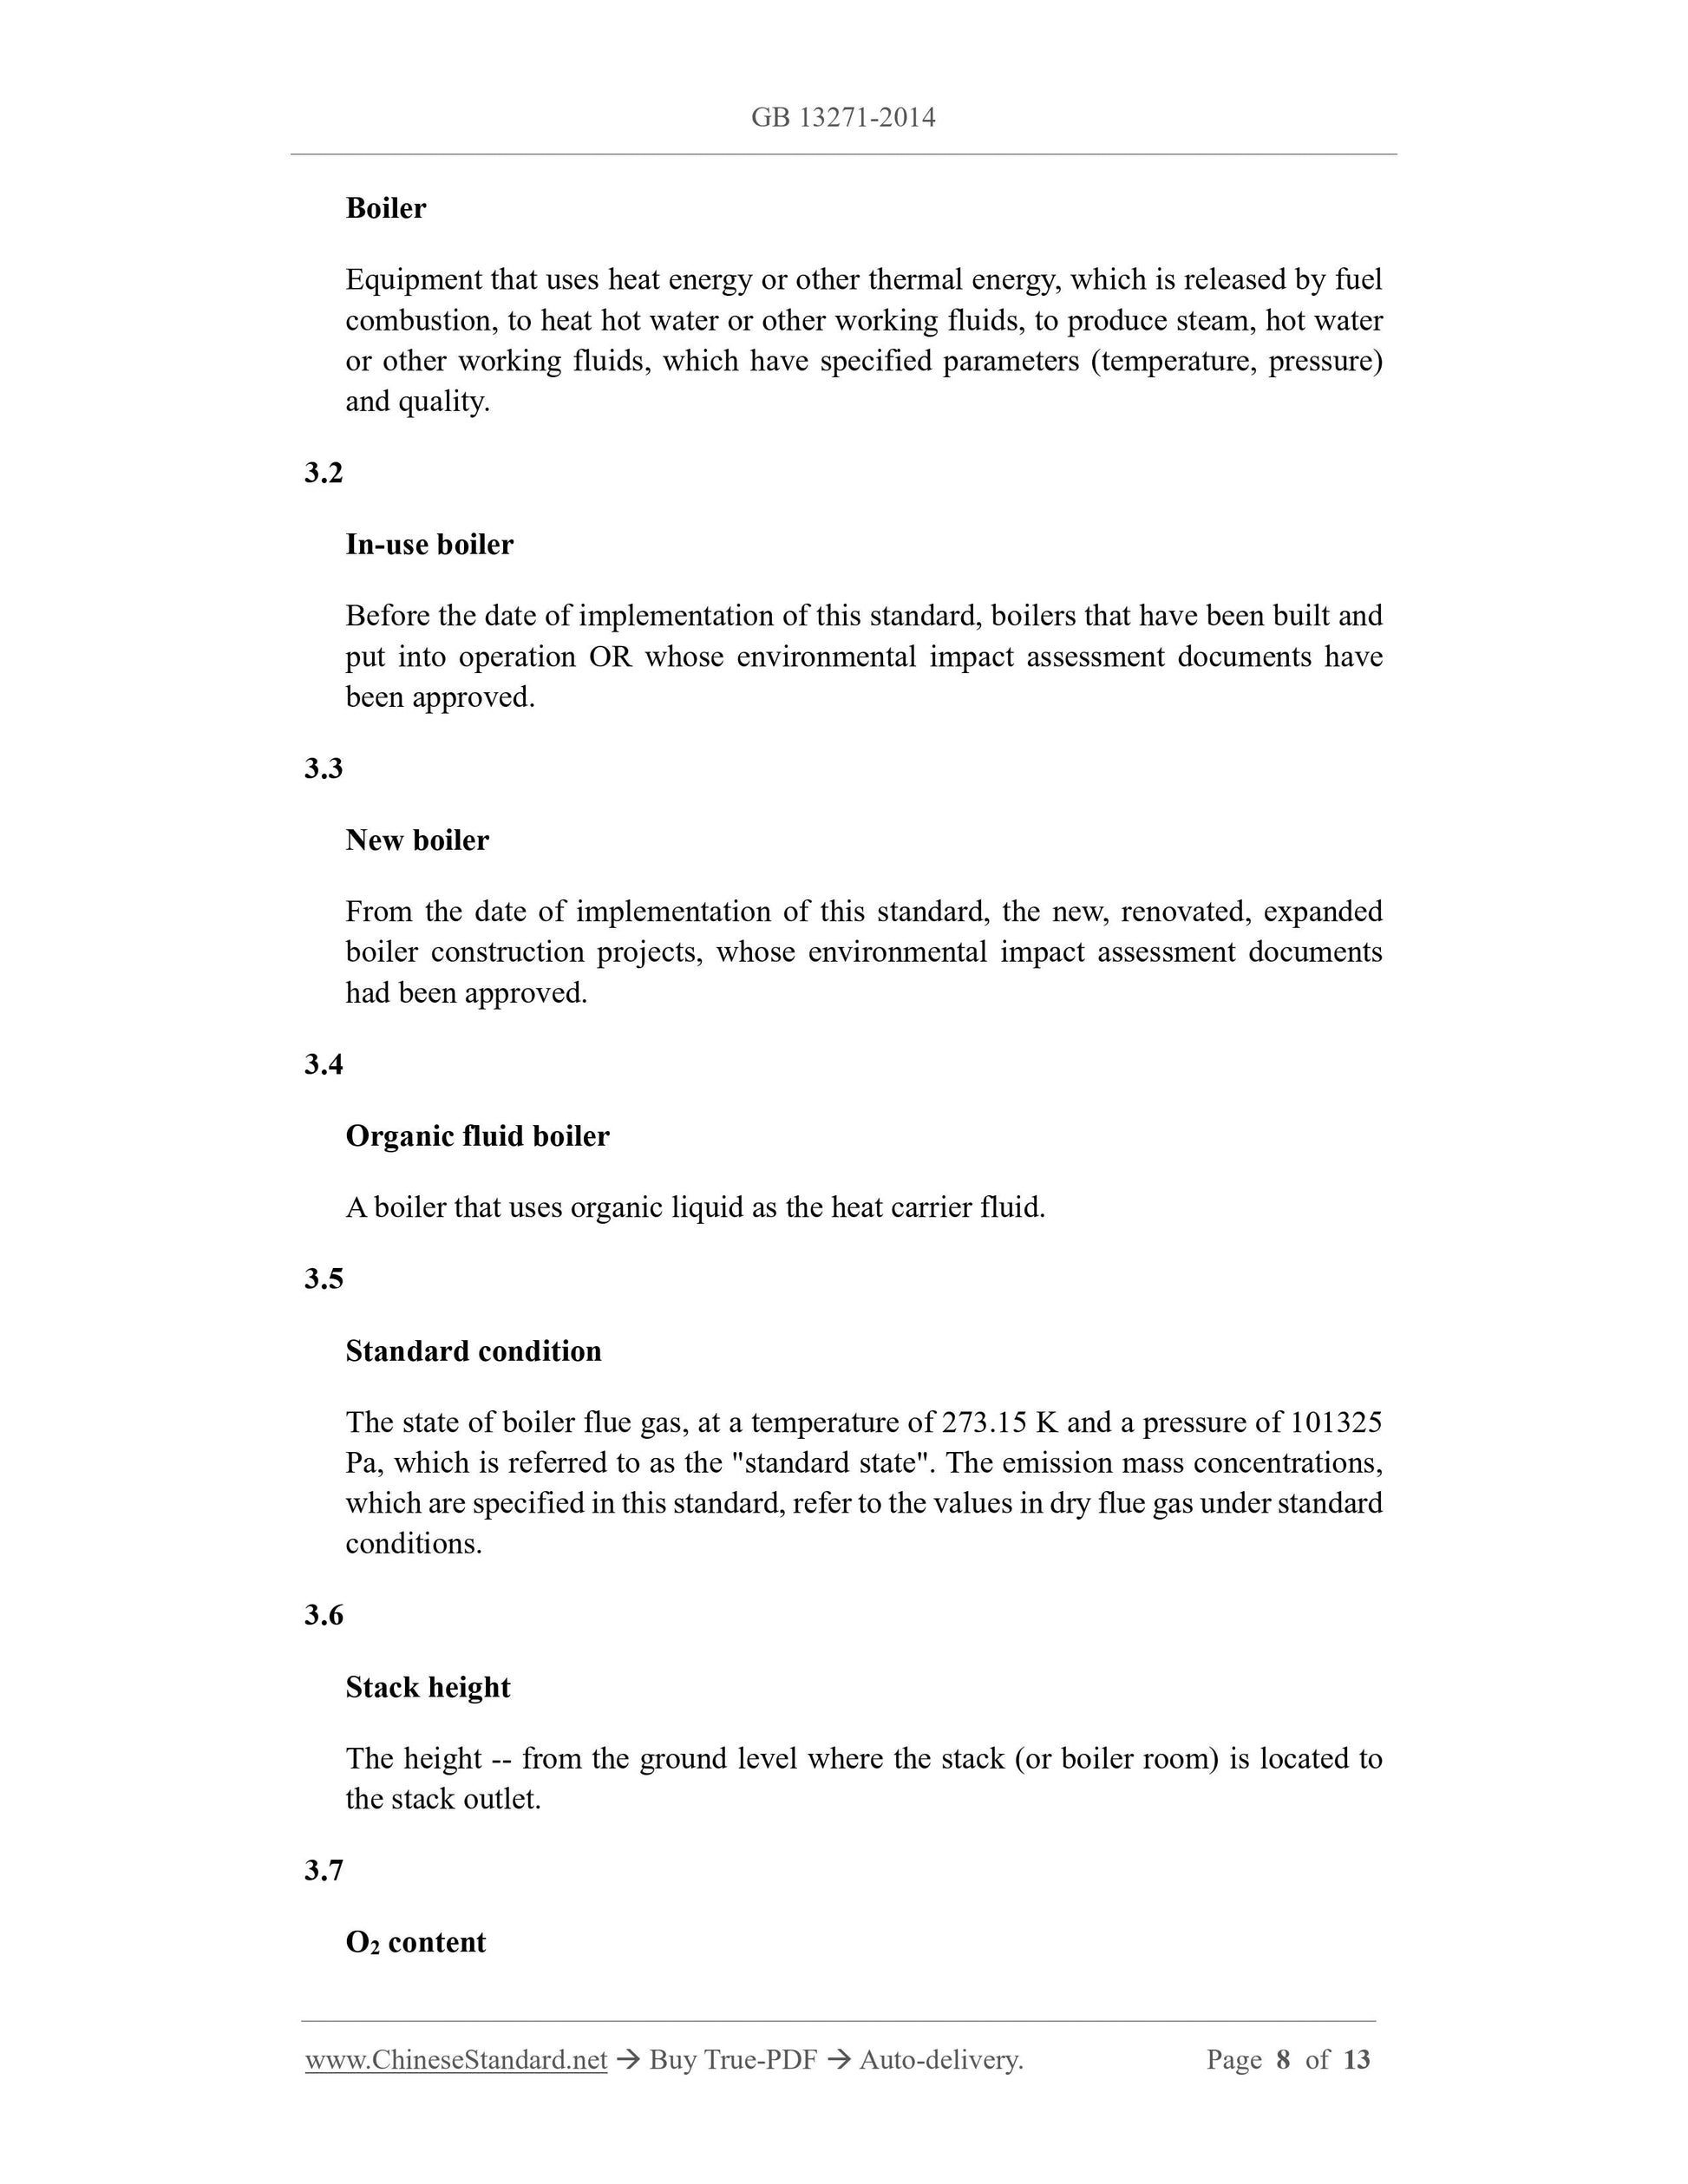 GB 13271-2014 Page 4